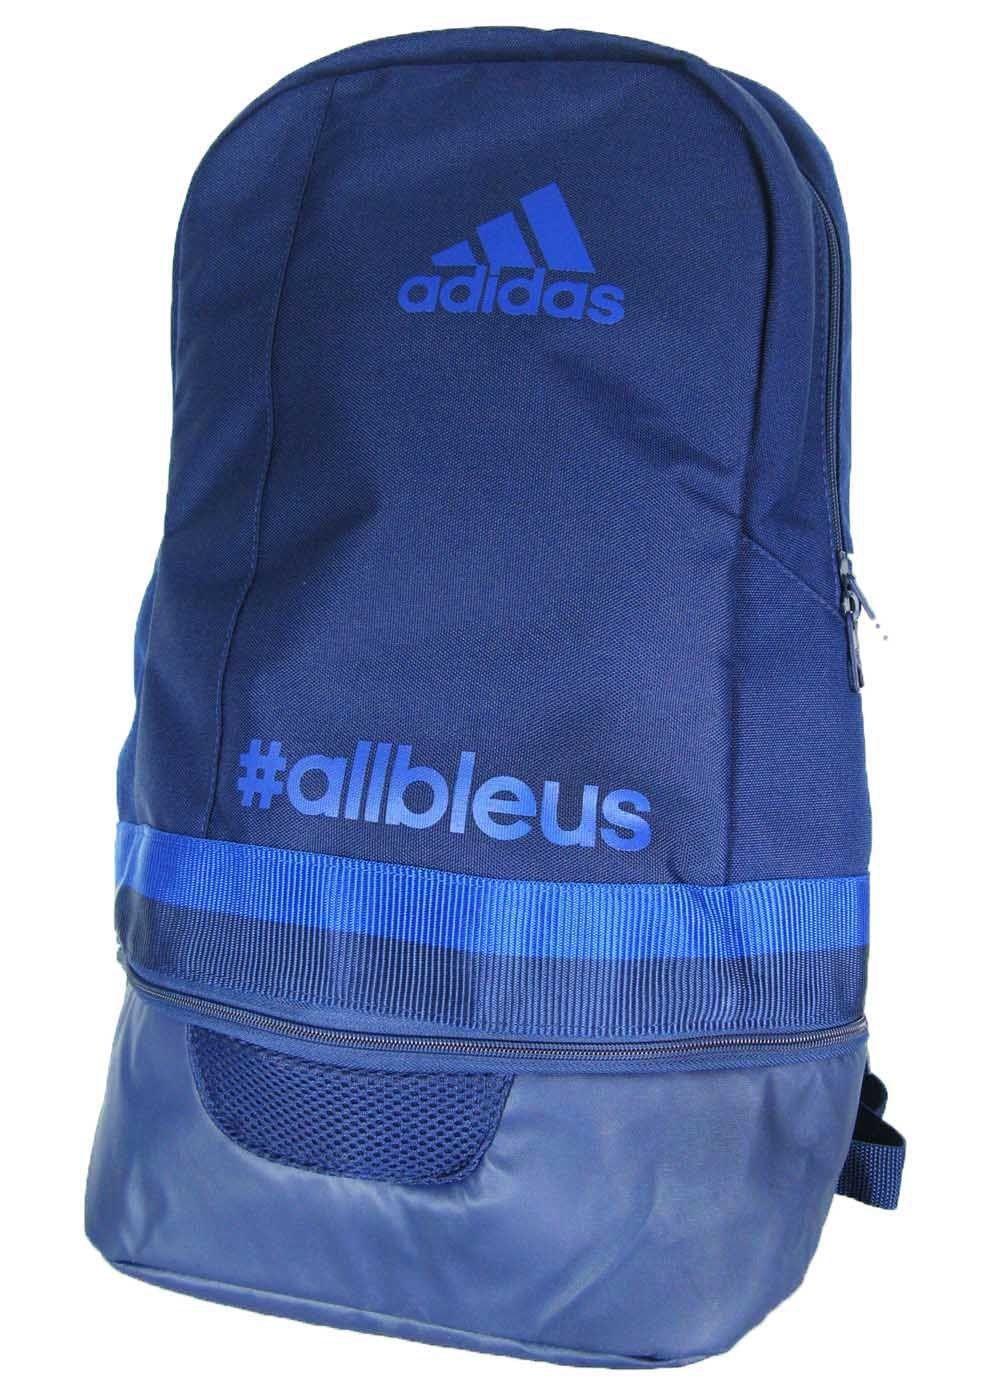 adidas bagagerie